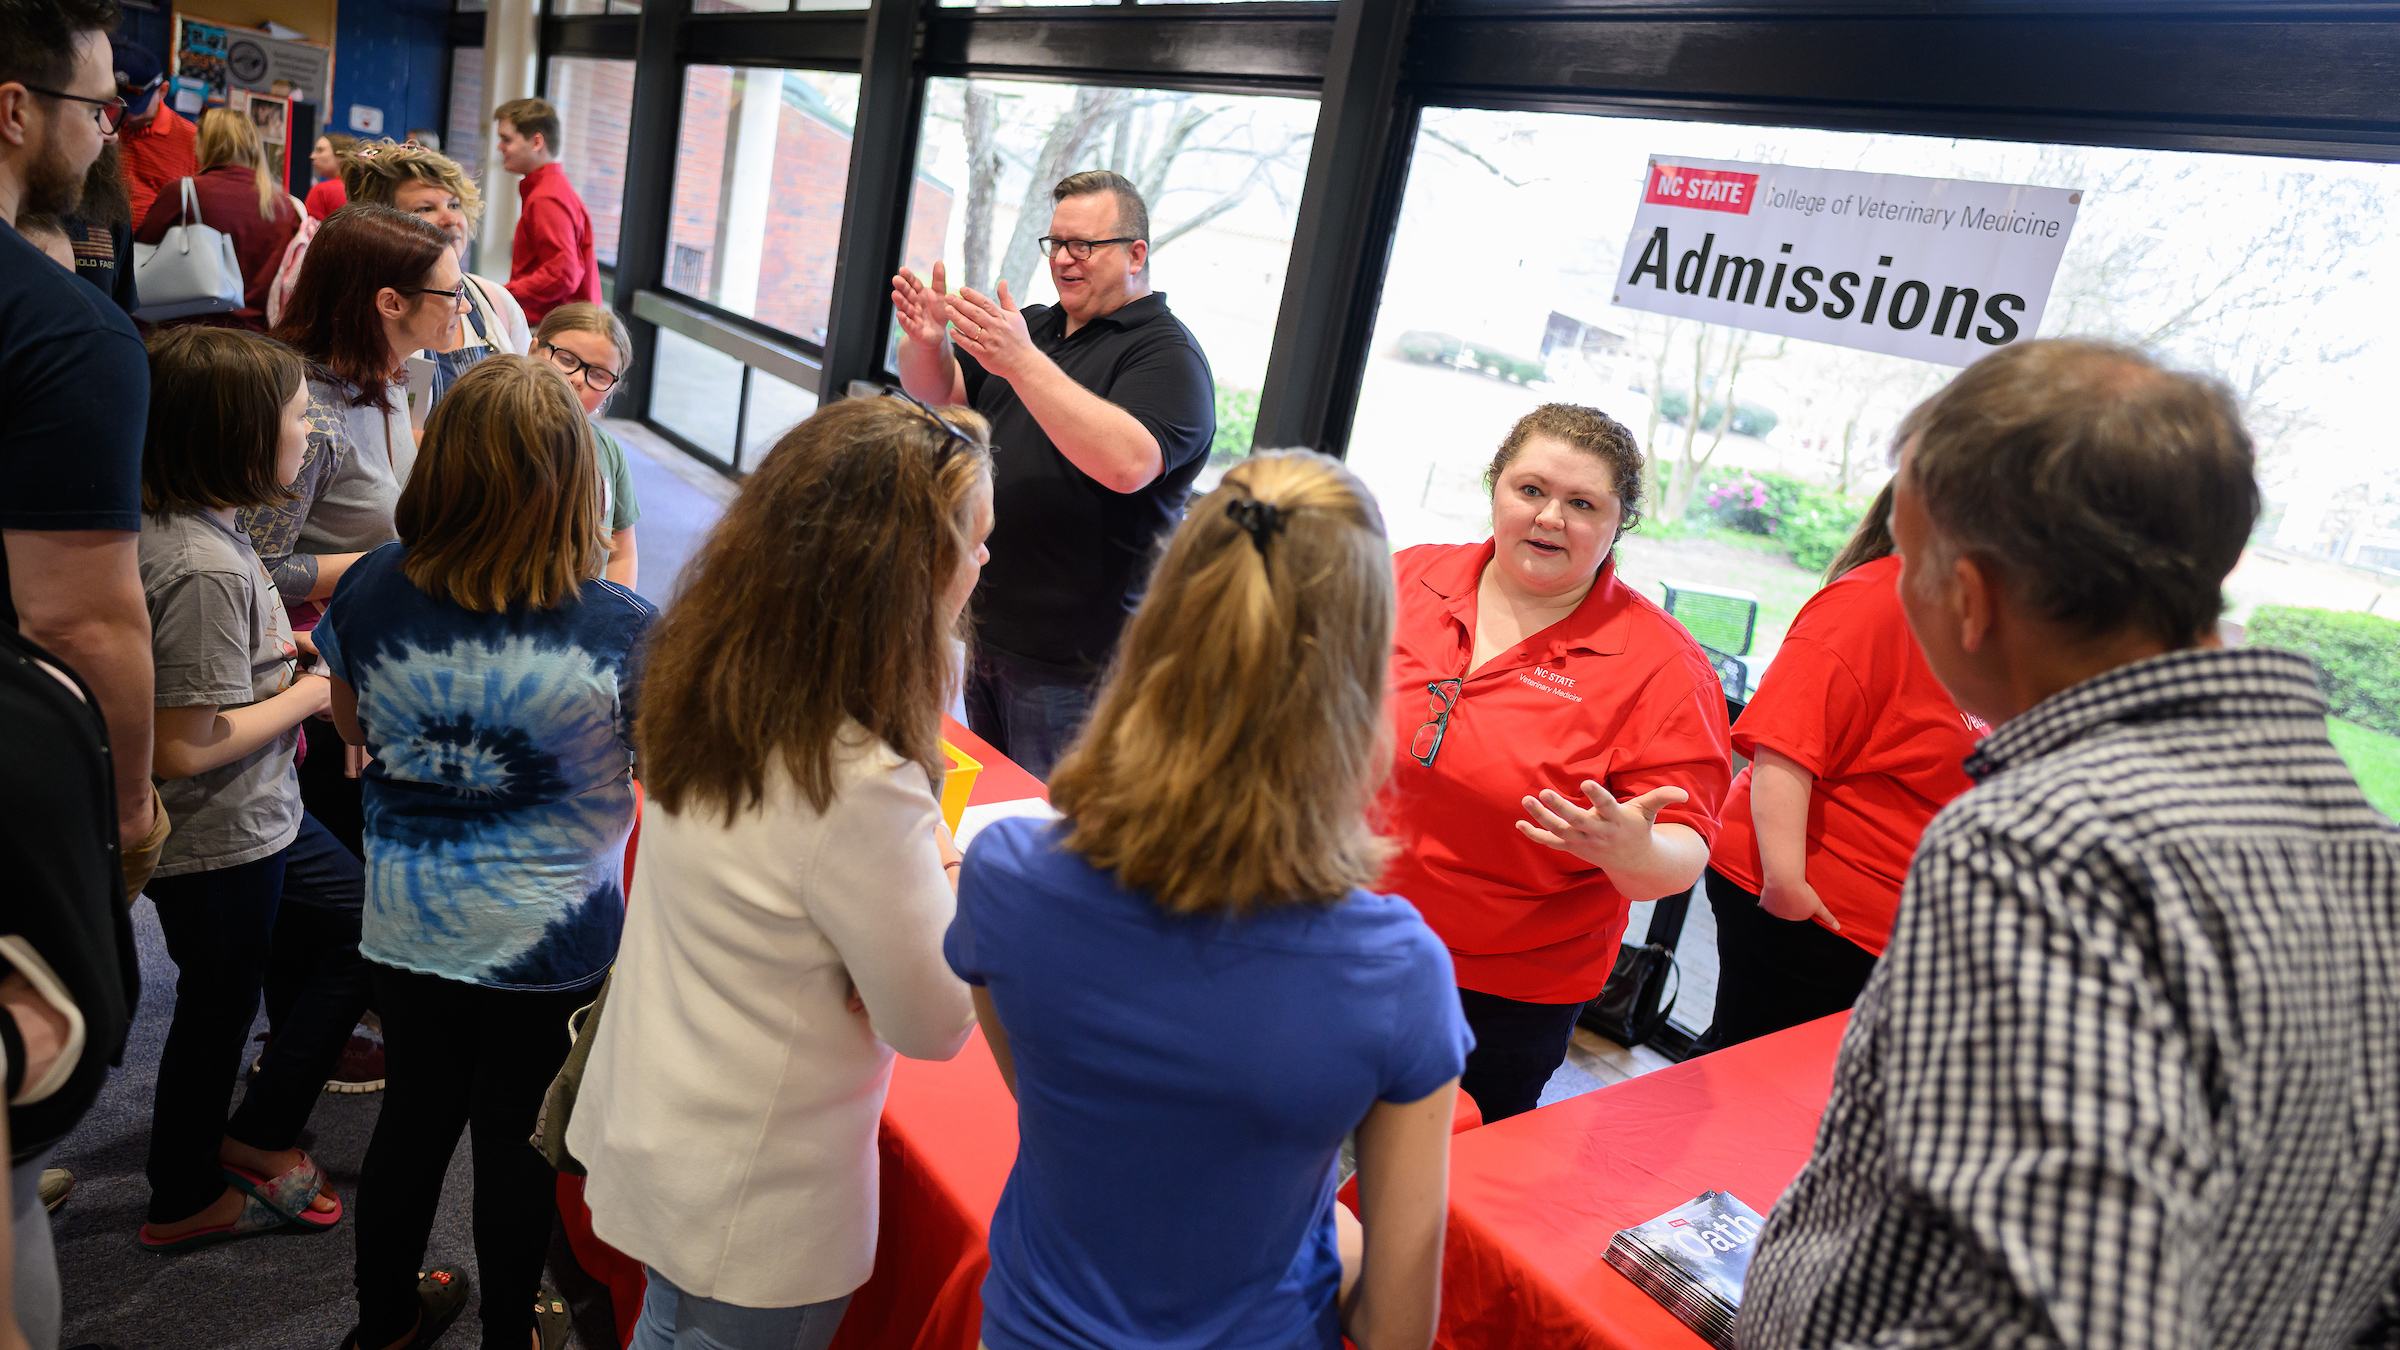 College admissions staff standing behind a table talk to families standing at an open house event.